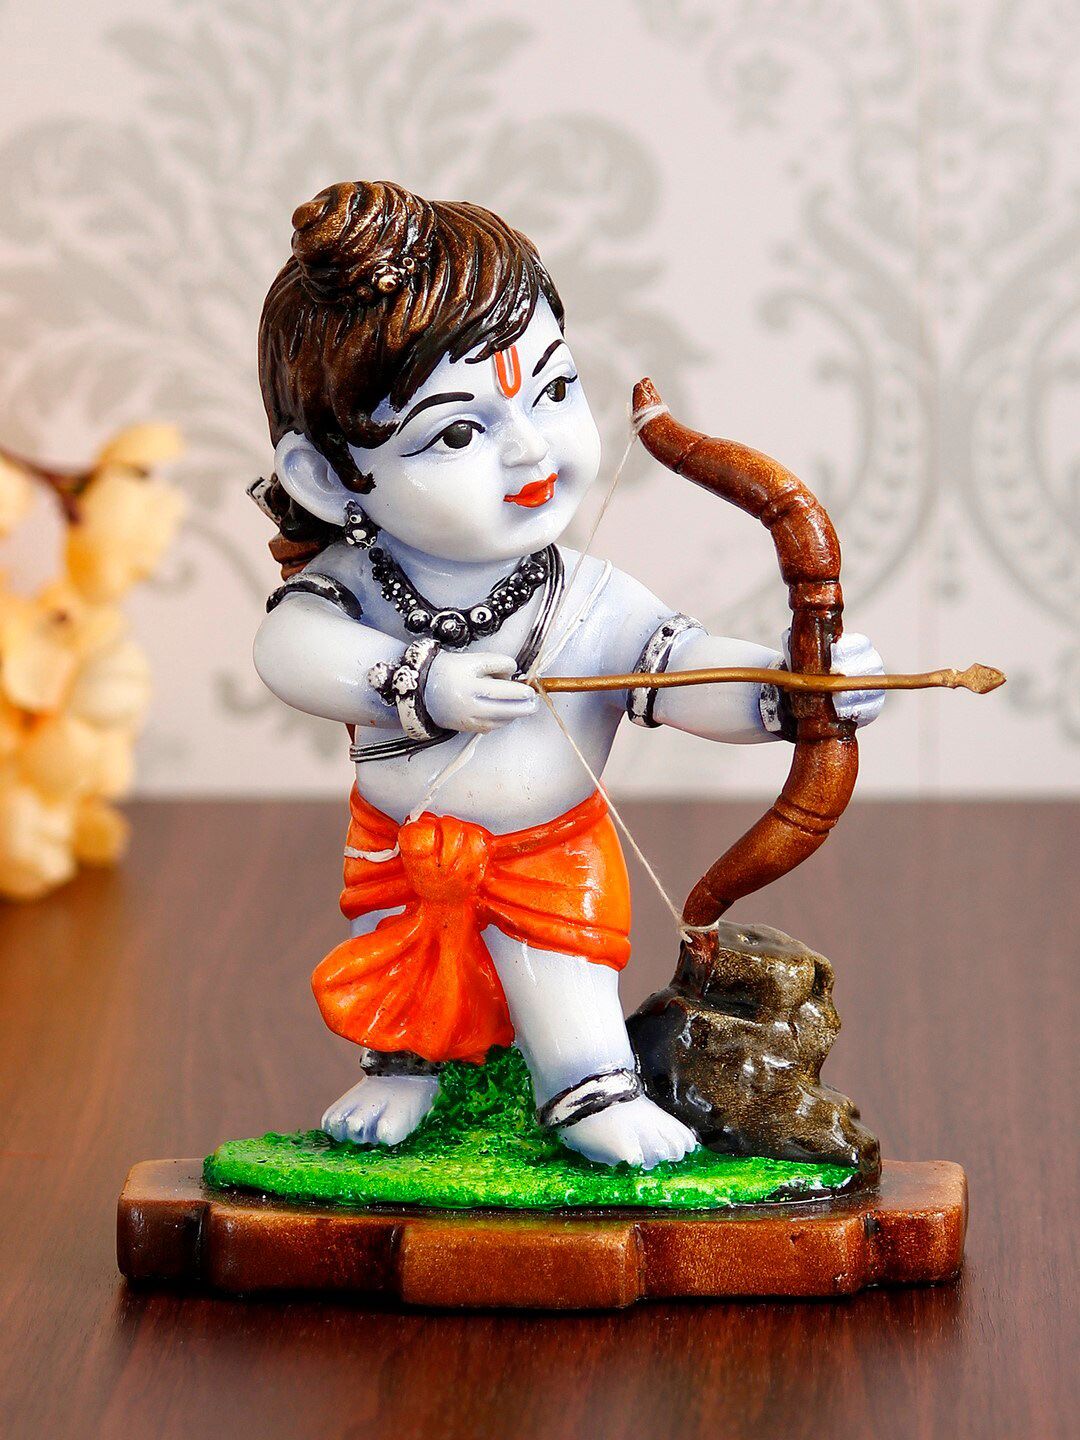 eCraftIndia Orange & Blue Lord Ram Playing with Bow & Arrow Handcrafted Figurine Showpiece Price in India